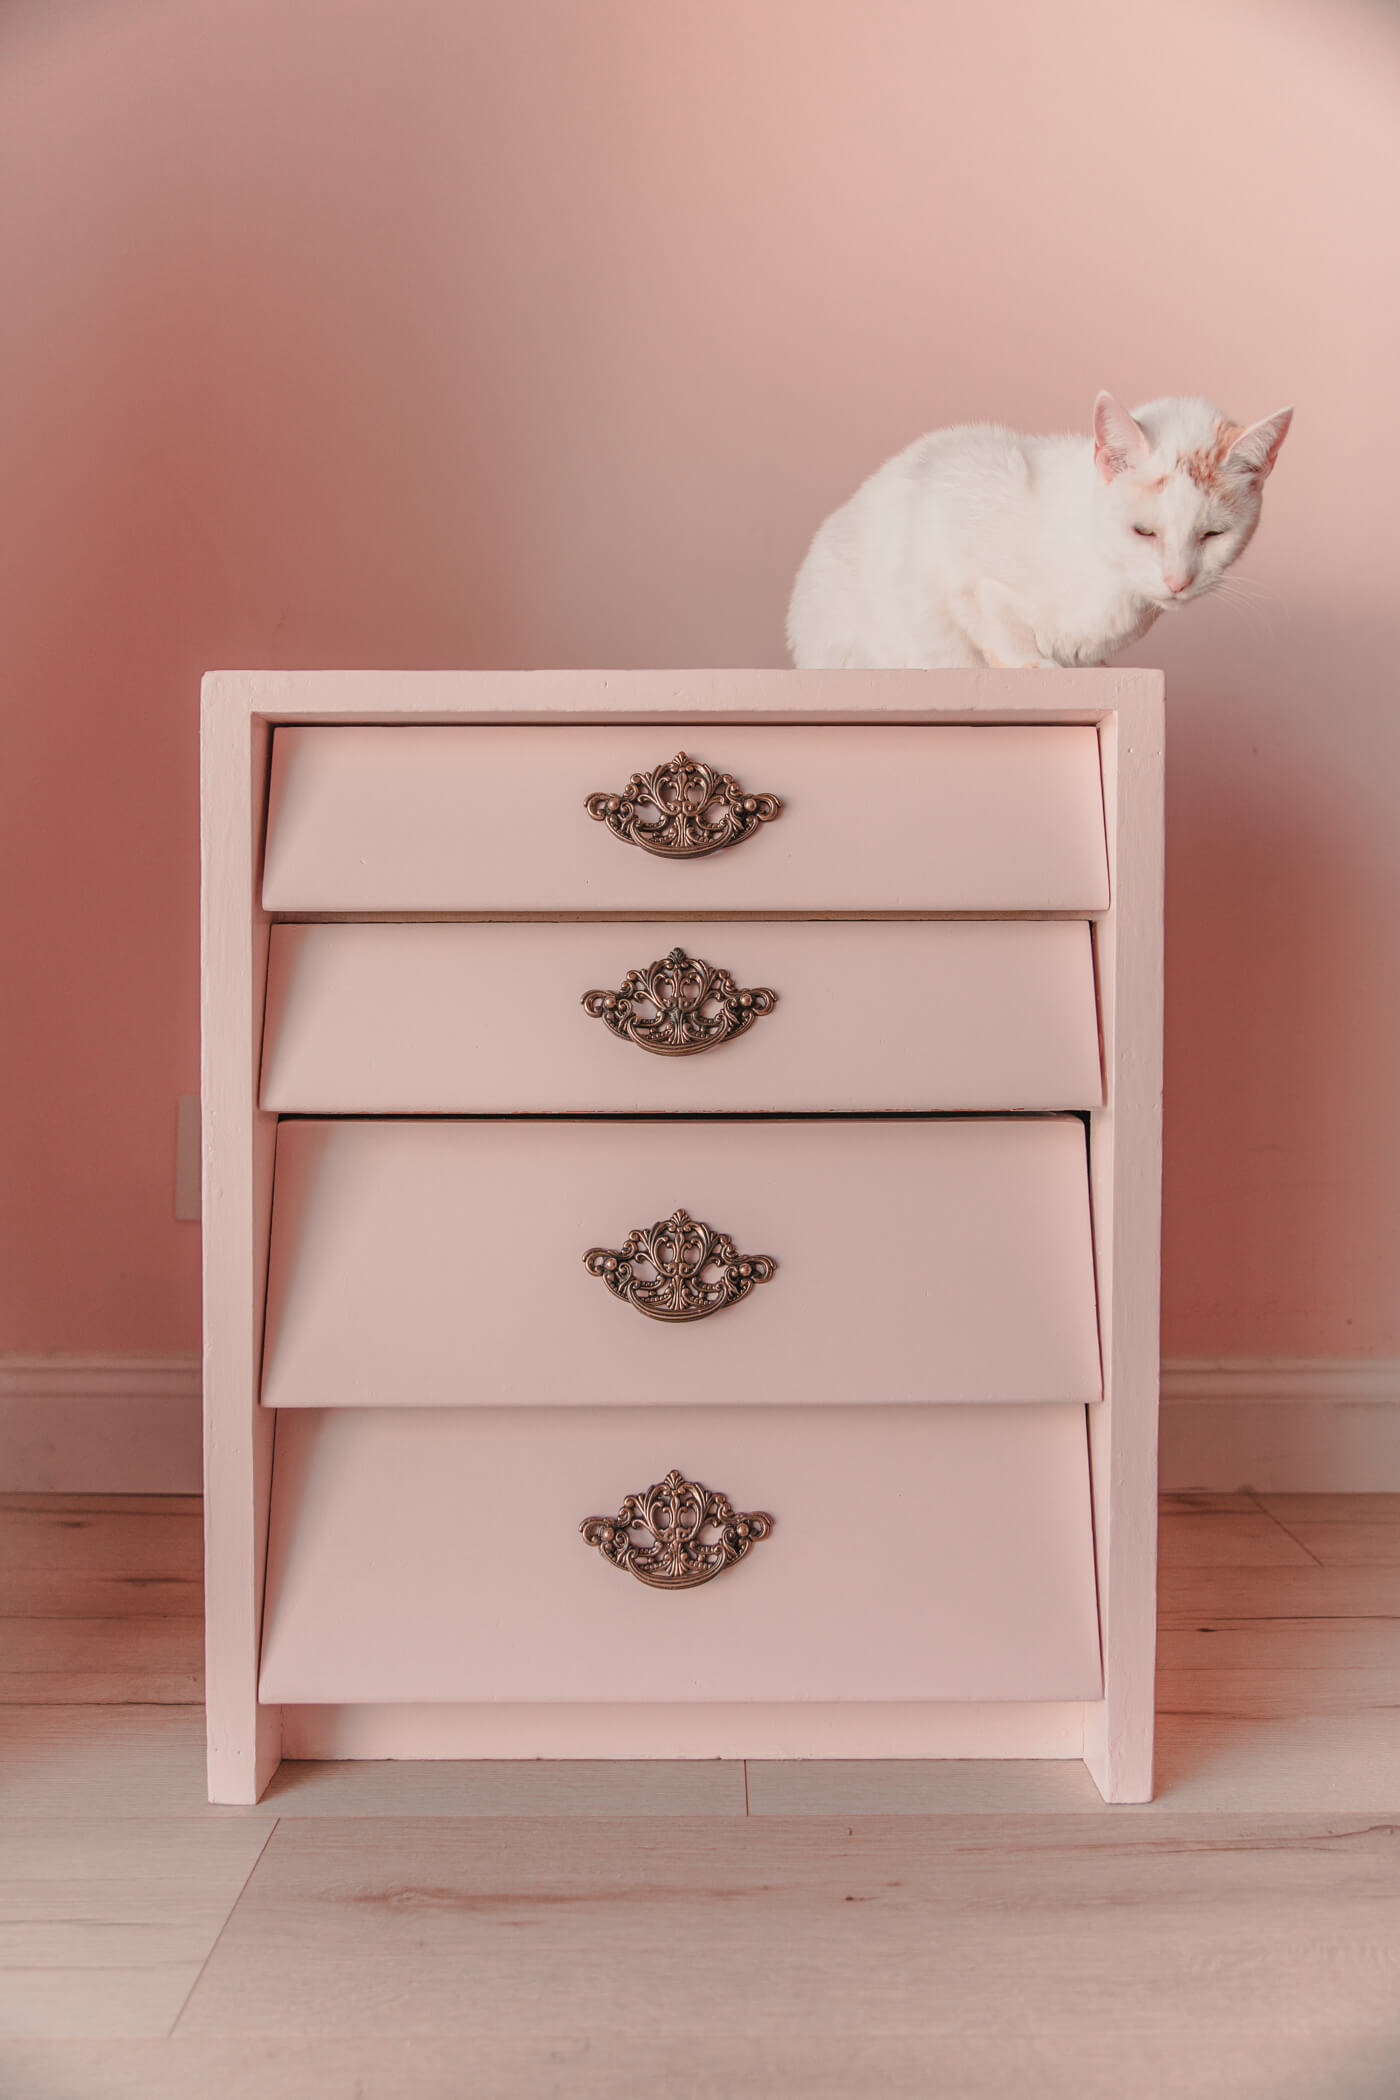 after the vintage dresser makeover and a cat sitting on top 